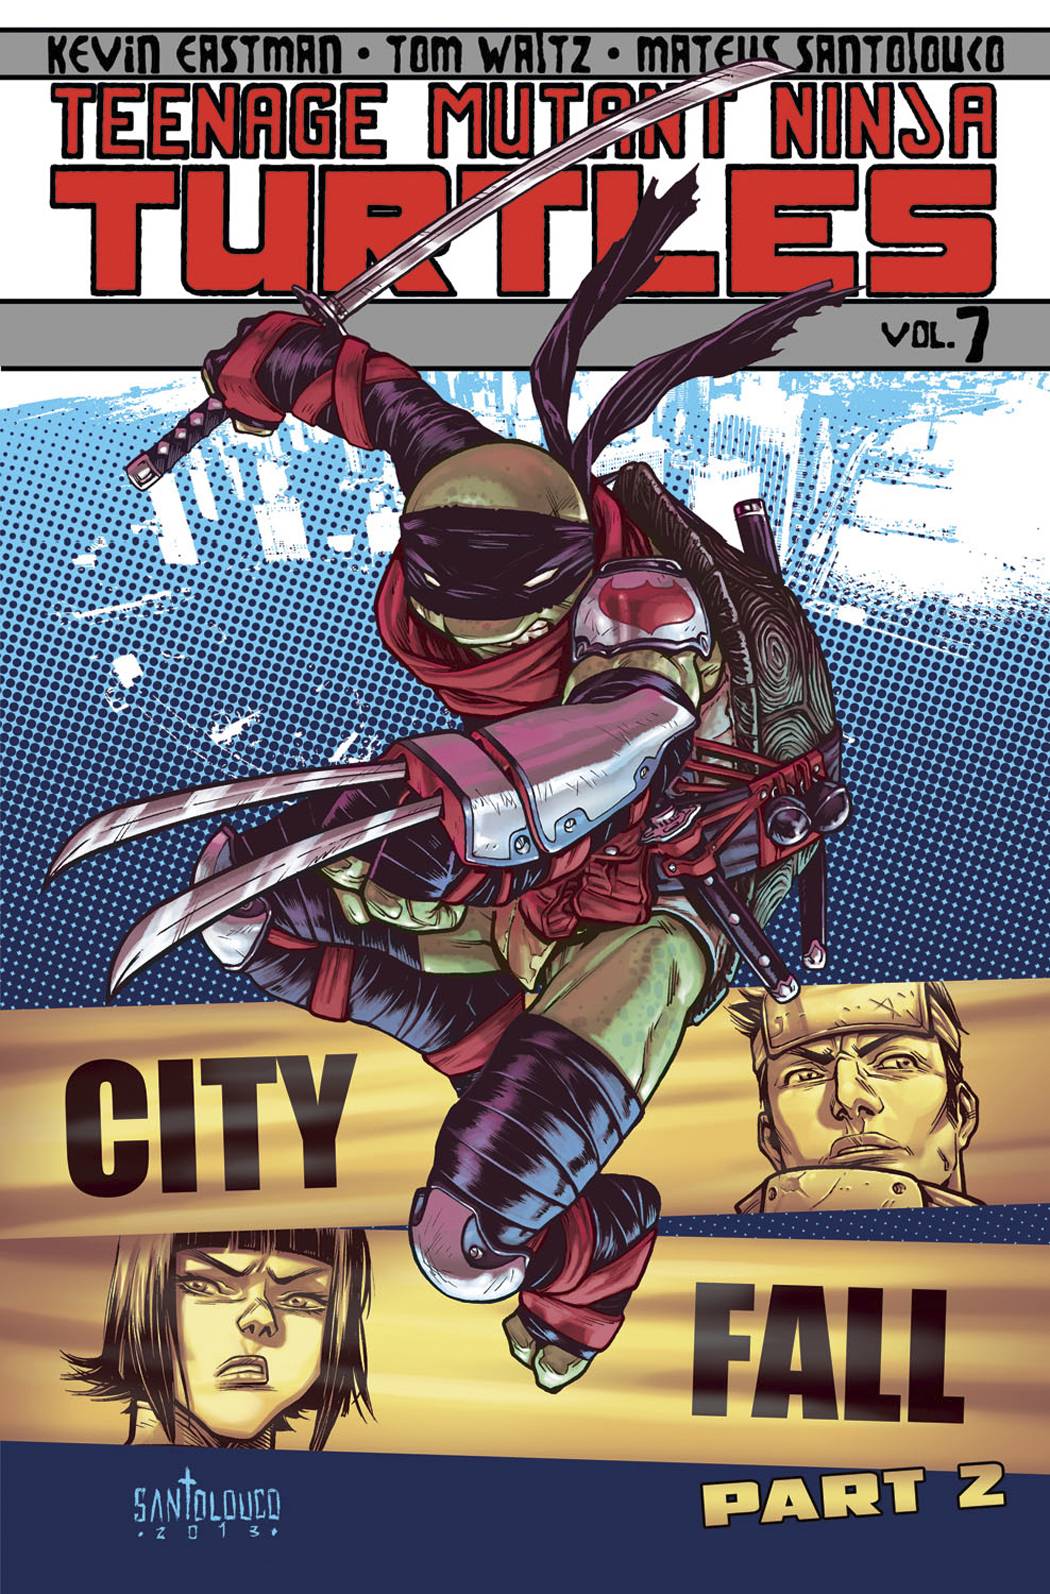 TMNT ONGOING TP VOL 07 CITY FALL PT 2